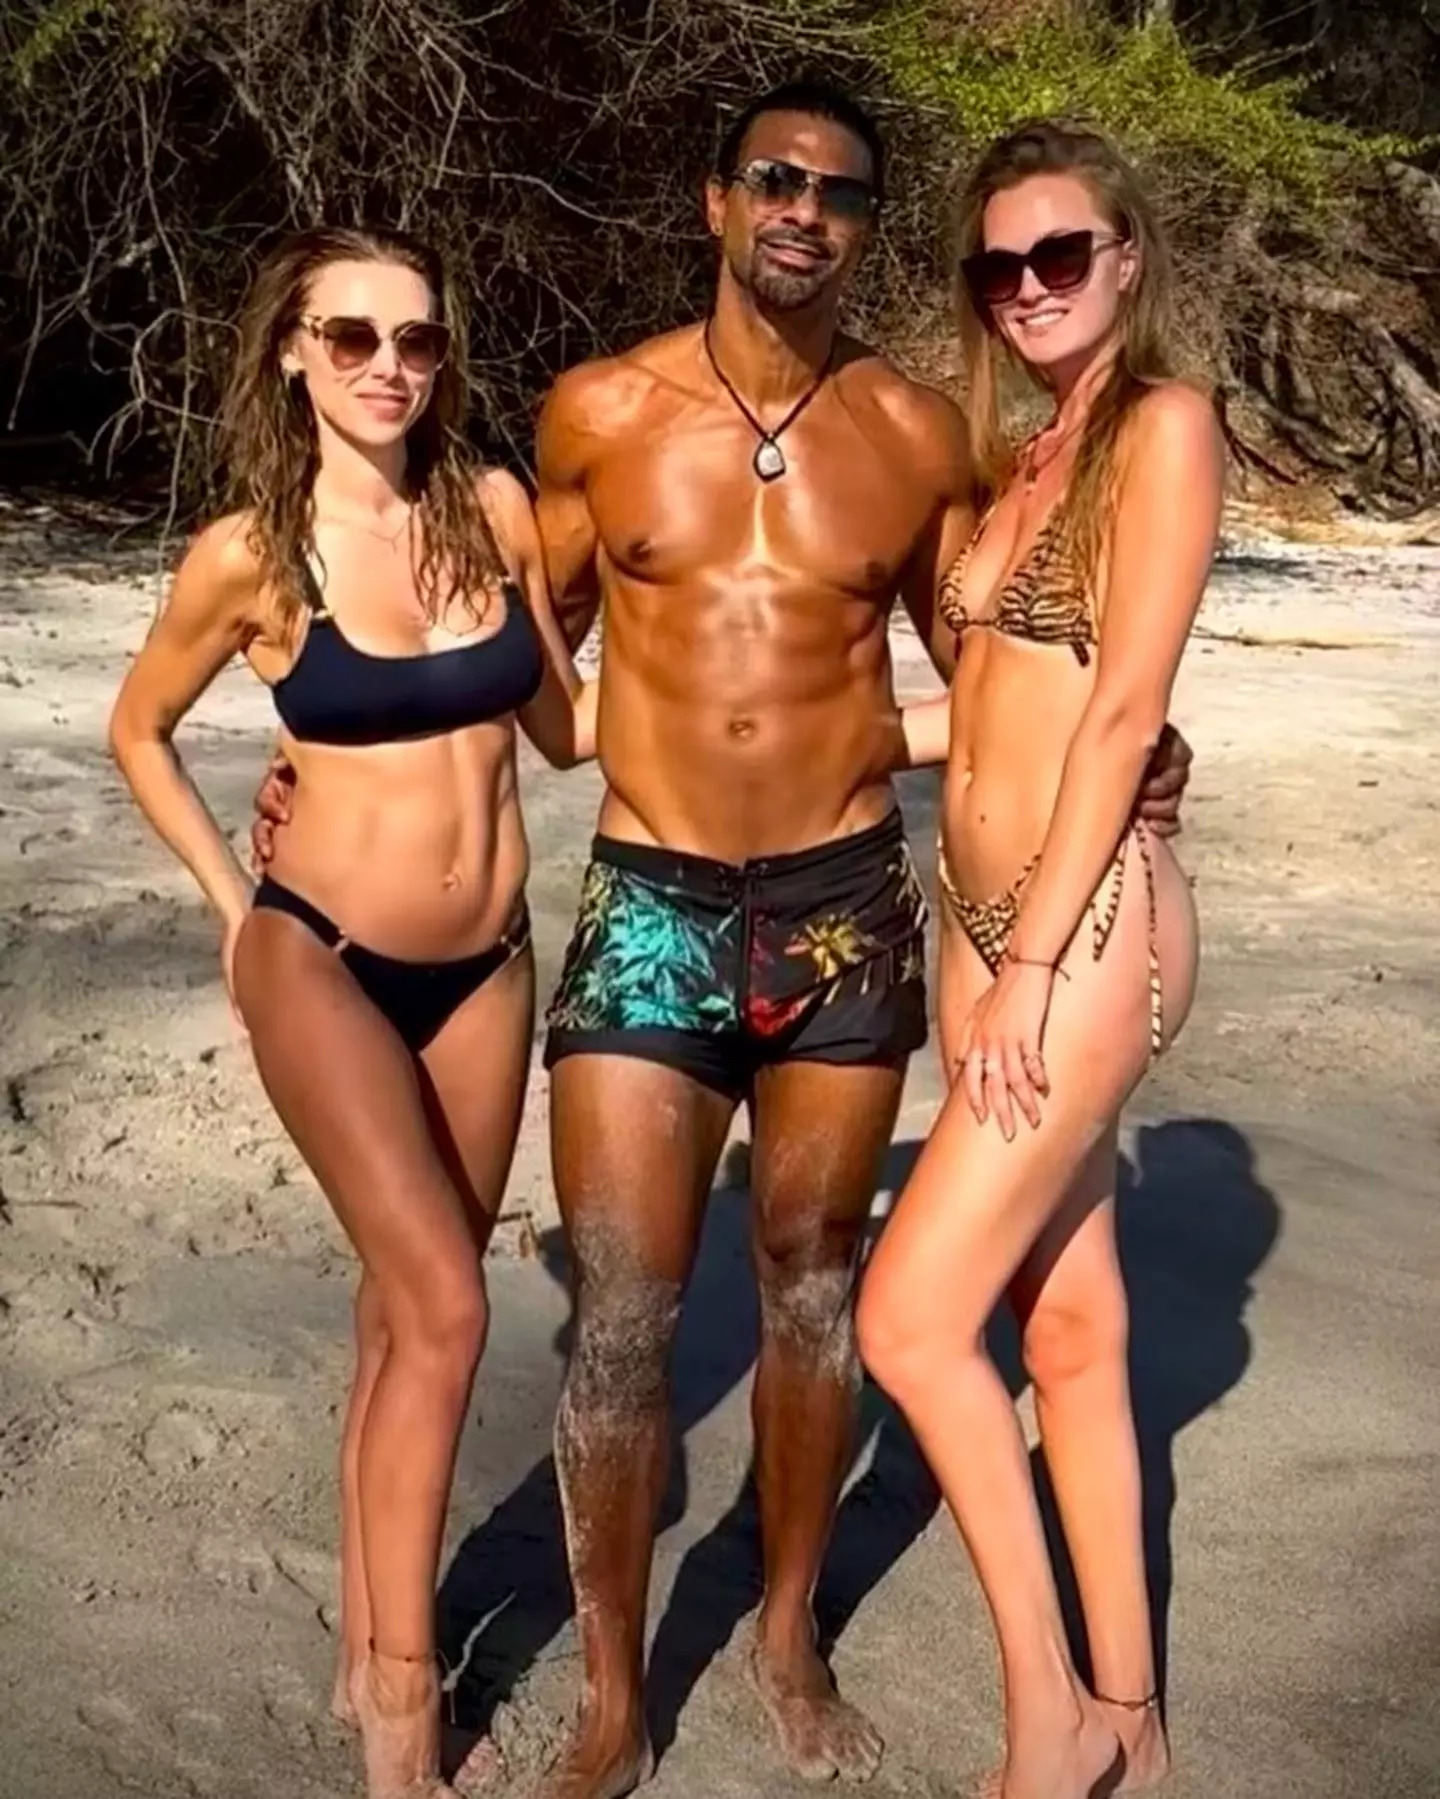 David Haye has wished Una Healy and Sian Osborne Happy Valentine's Day and fans believe this has all but confirmed the throuple rumours.